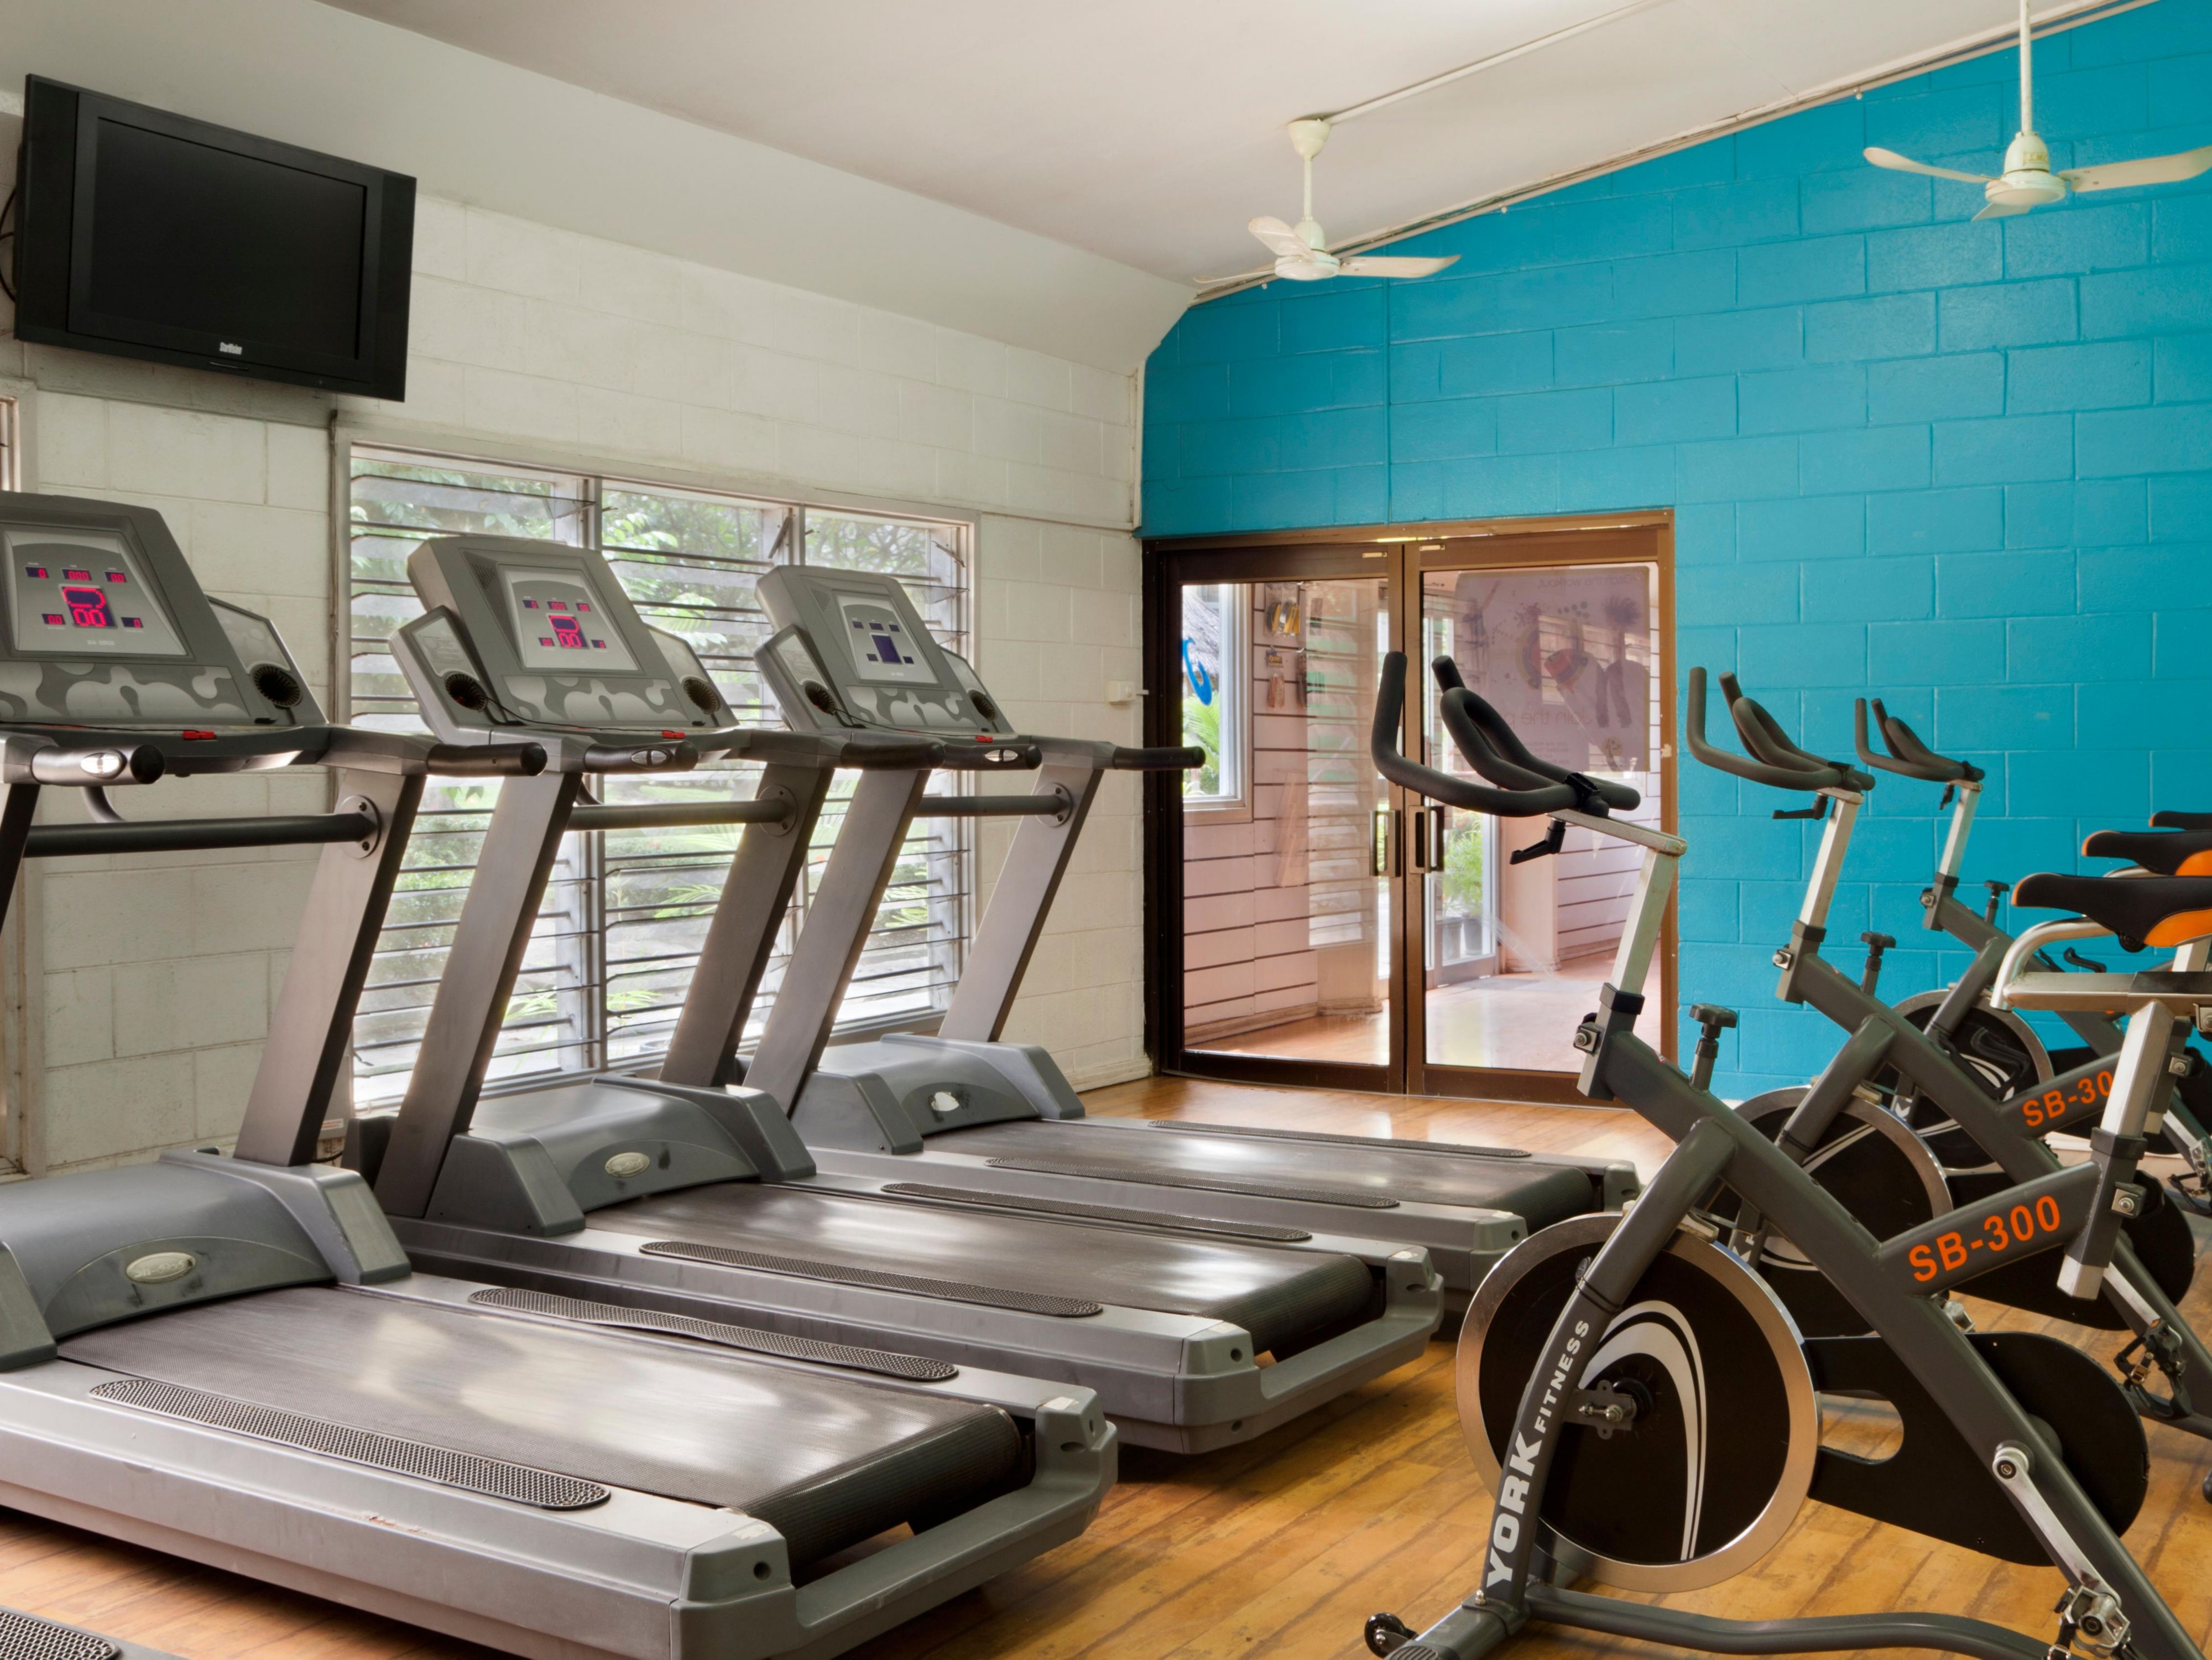 Keep fit at the Life Gym with an array of facilities including 2 squash courts, a weight room, treadmills, bikes and rowing machines. Gym access is complimentary for guests staying with us. Join in the Zumba or other workout classes for an additional fee.